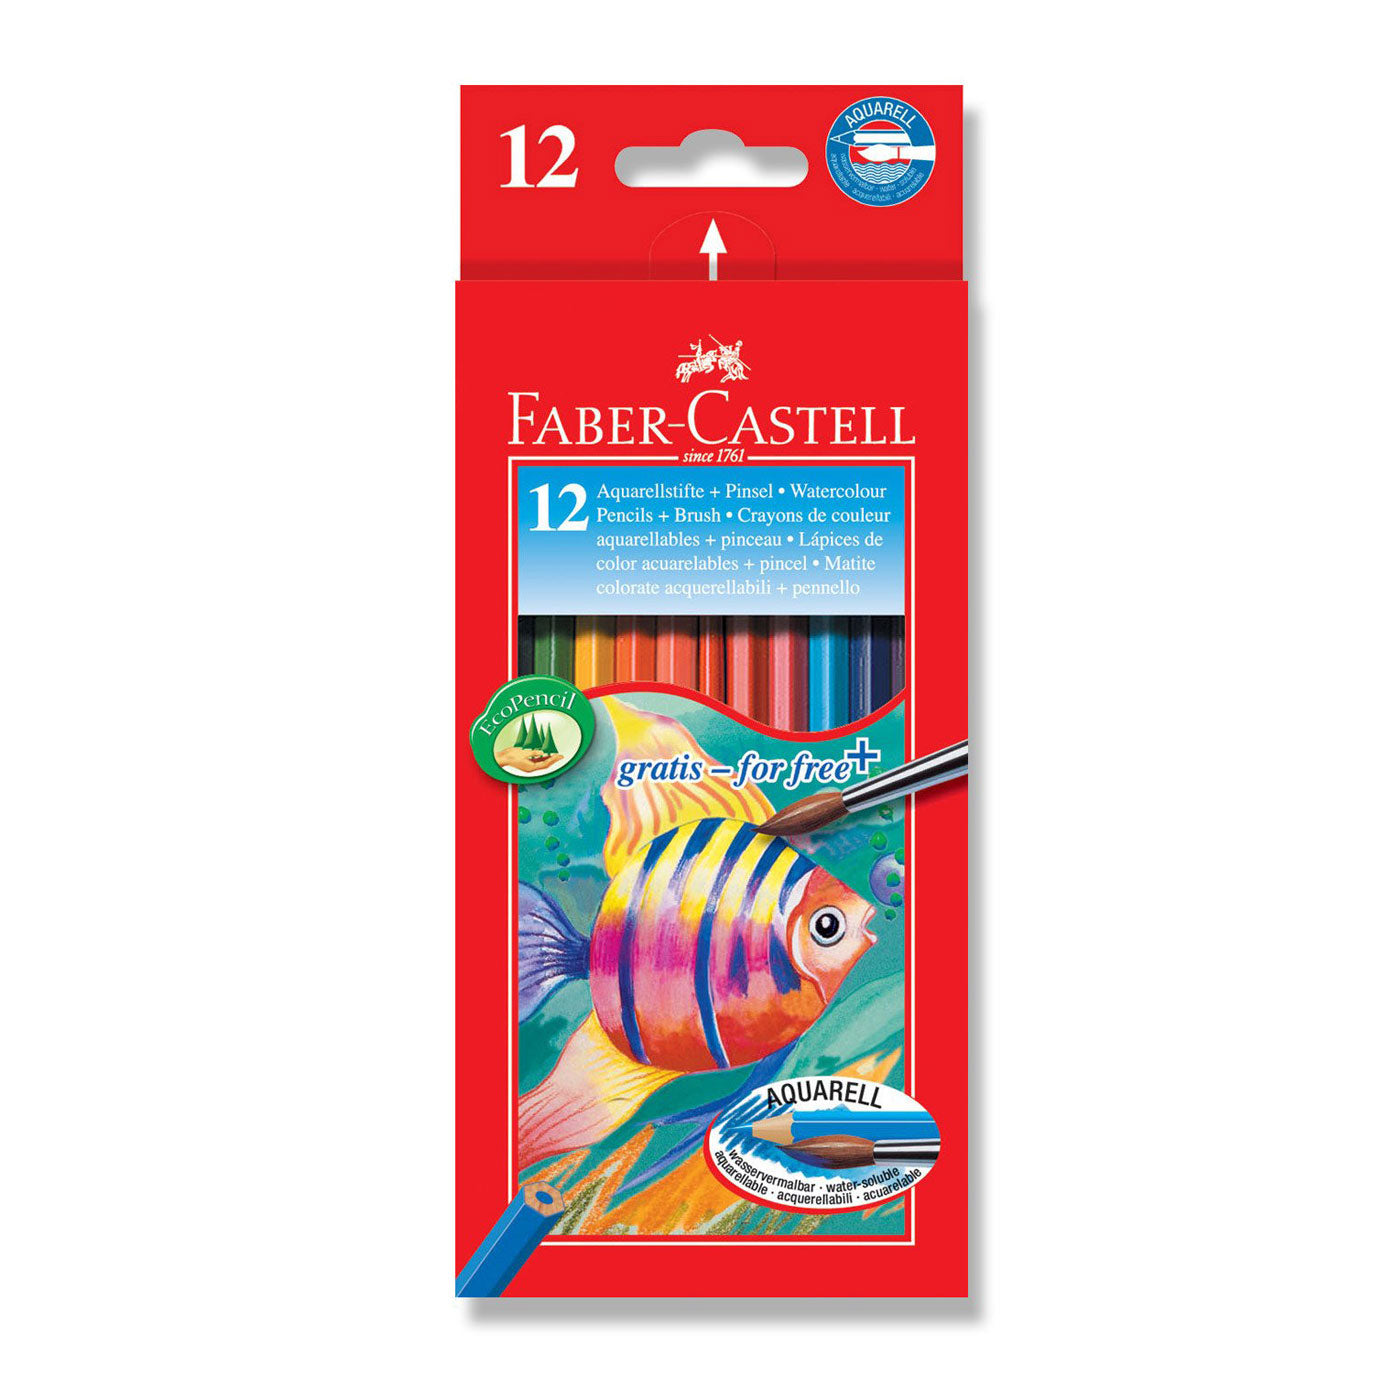 Faber-Castell Watercolour Pencils Full Length 12 Pack [Free Paint Brush]